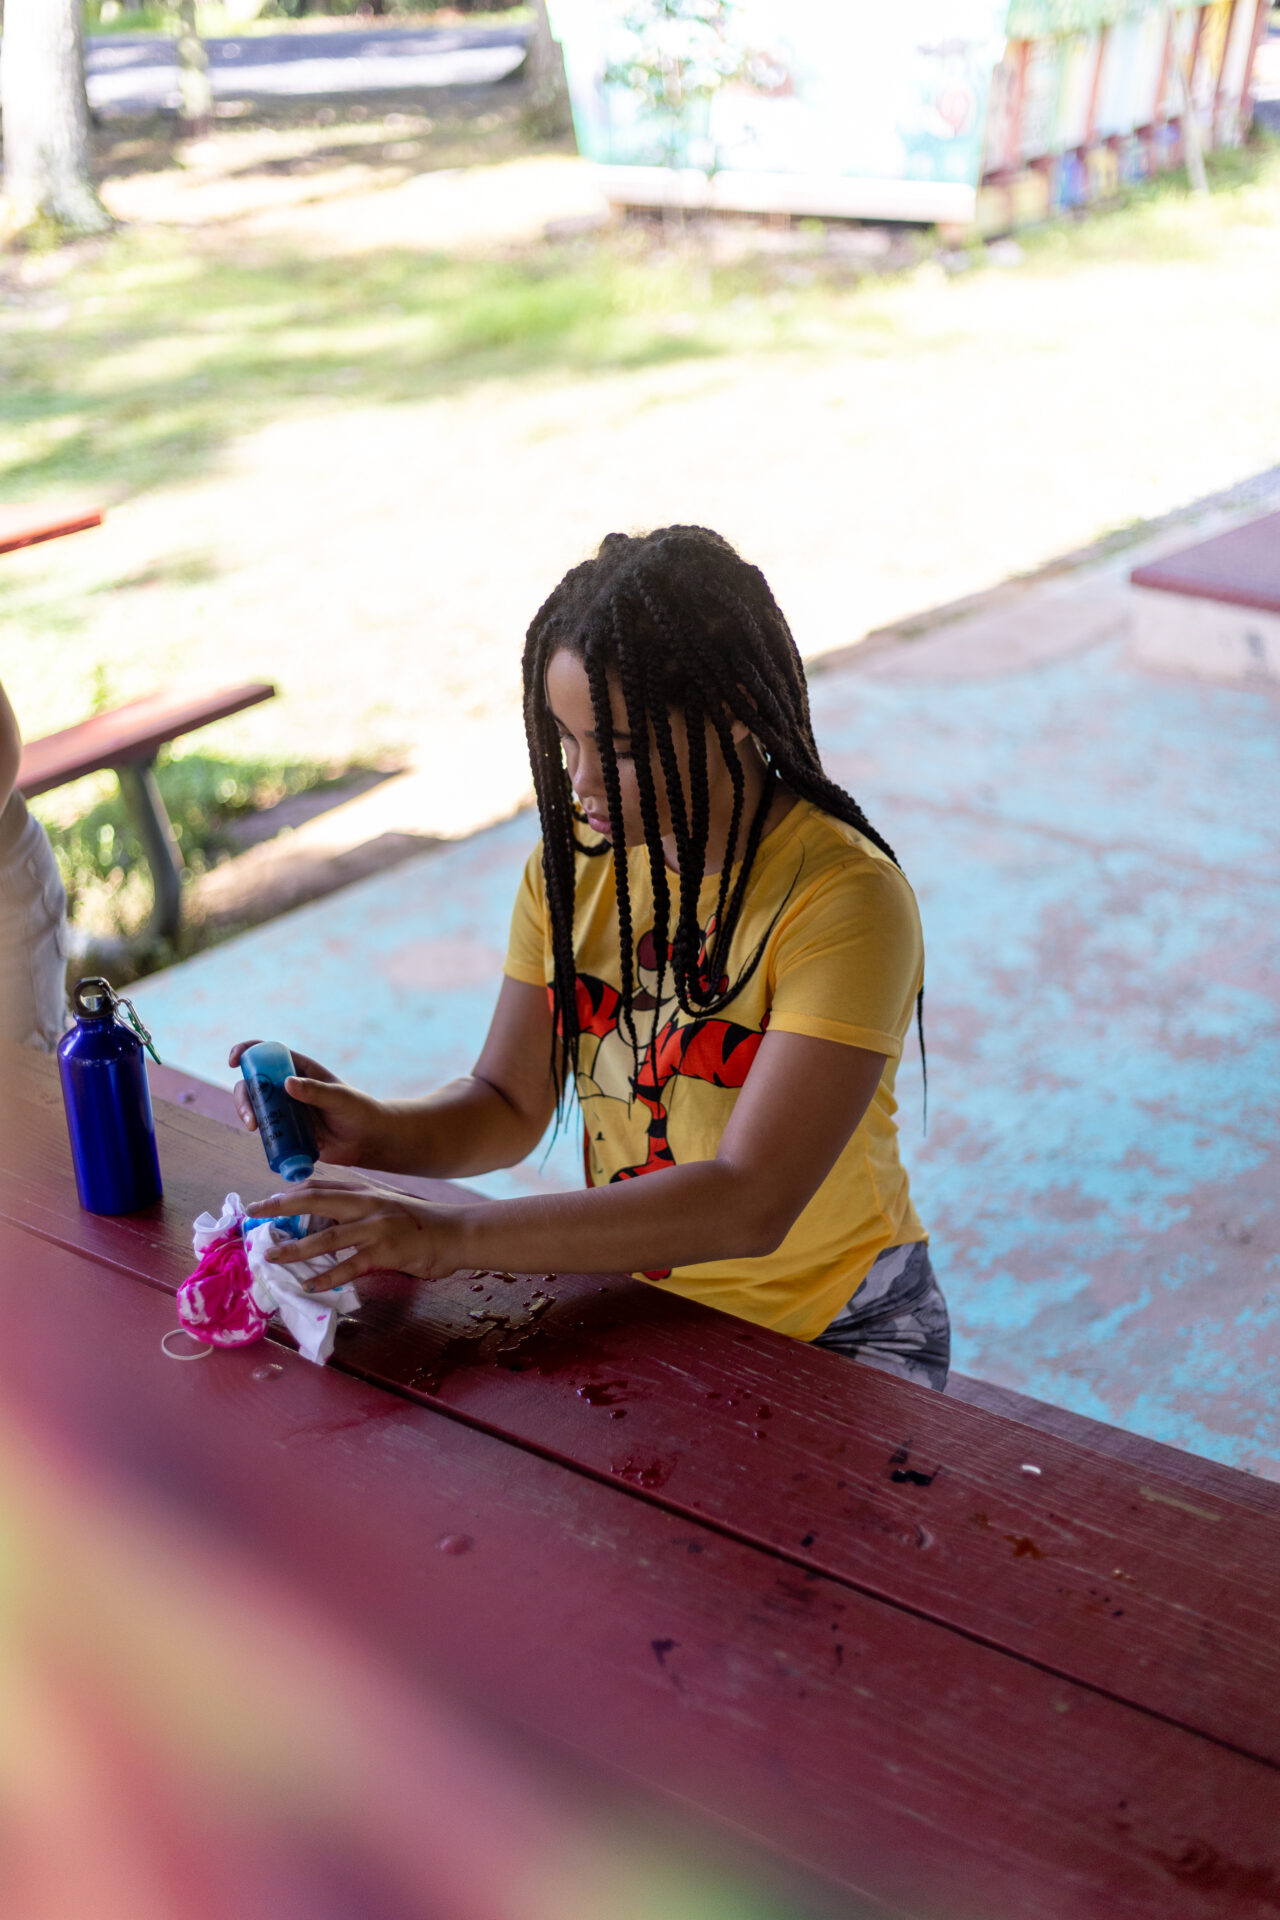 A woman with dreadlocks sitting at a picnic table enjoying the serene BearTrax surroundings.